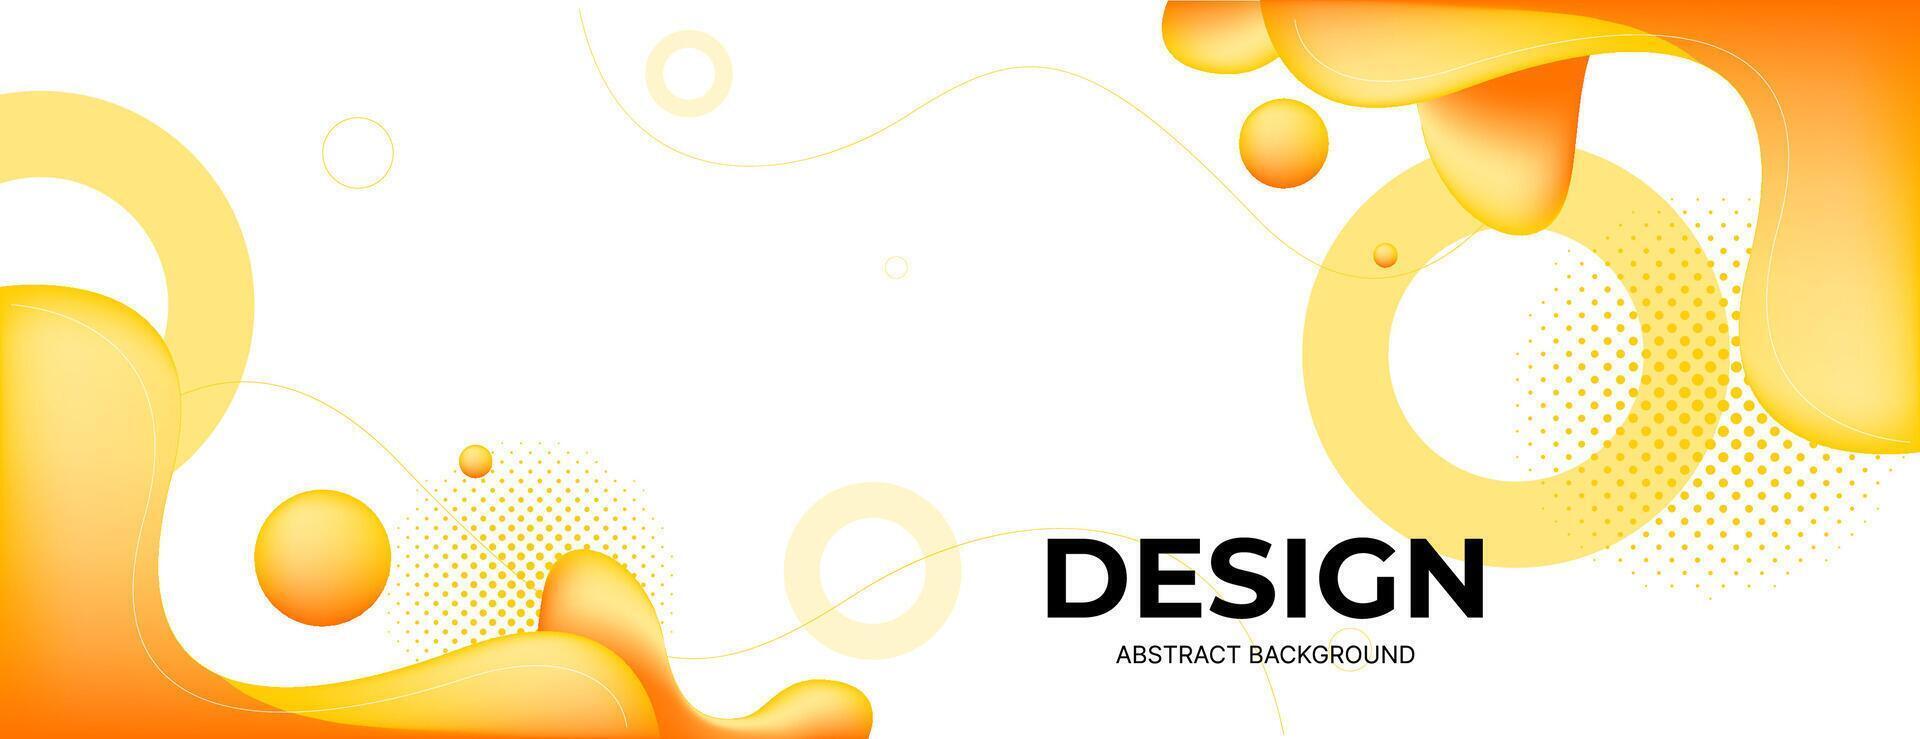 abstract banner background with yellow orange fluid shapes and geometric shapes. vector illustration